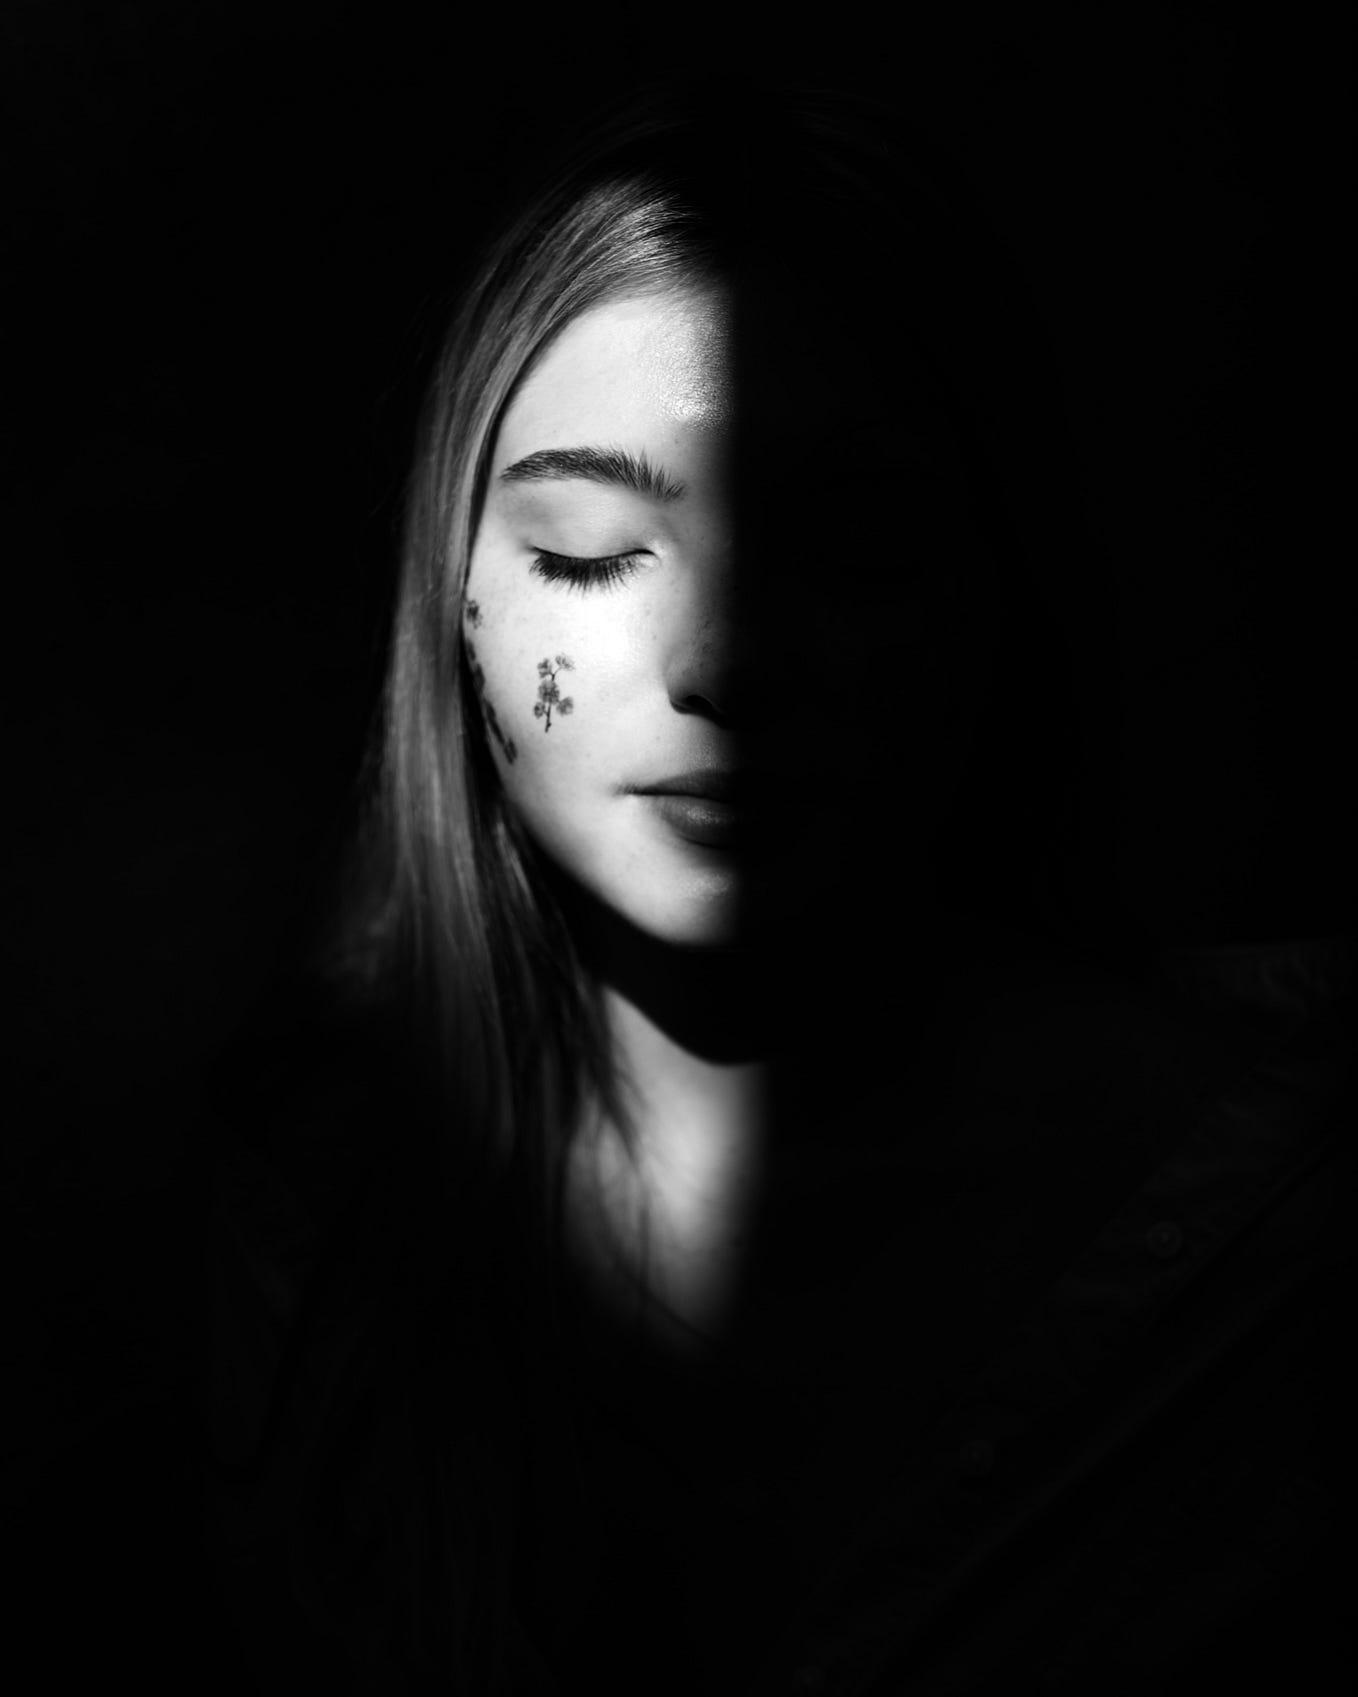 Black and white photo of a female with her eyes gently closed. A black shadow cast, covering half of her face.